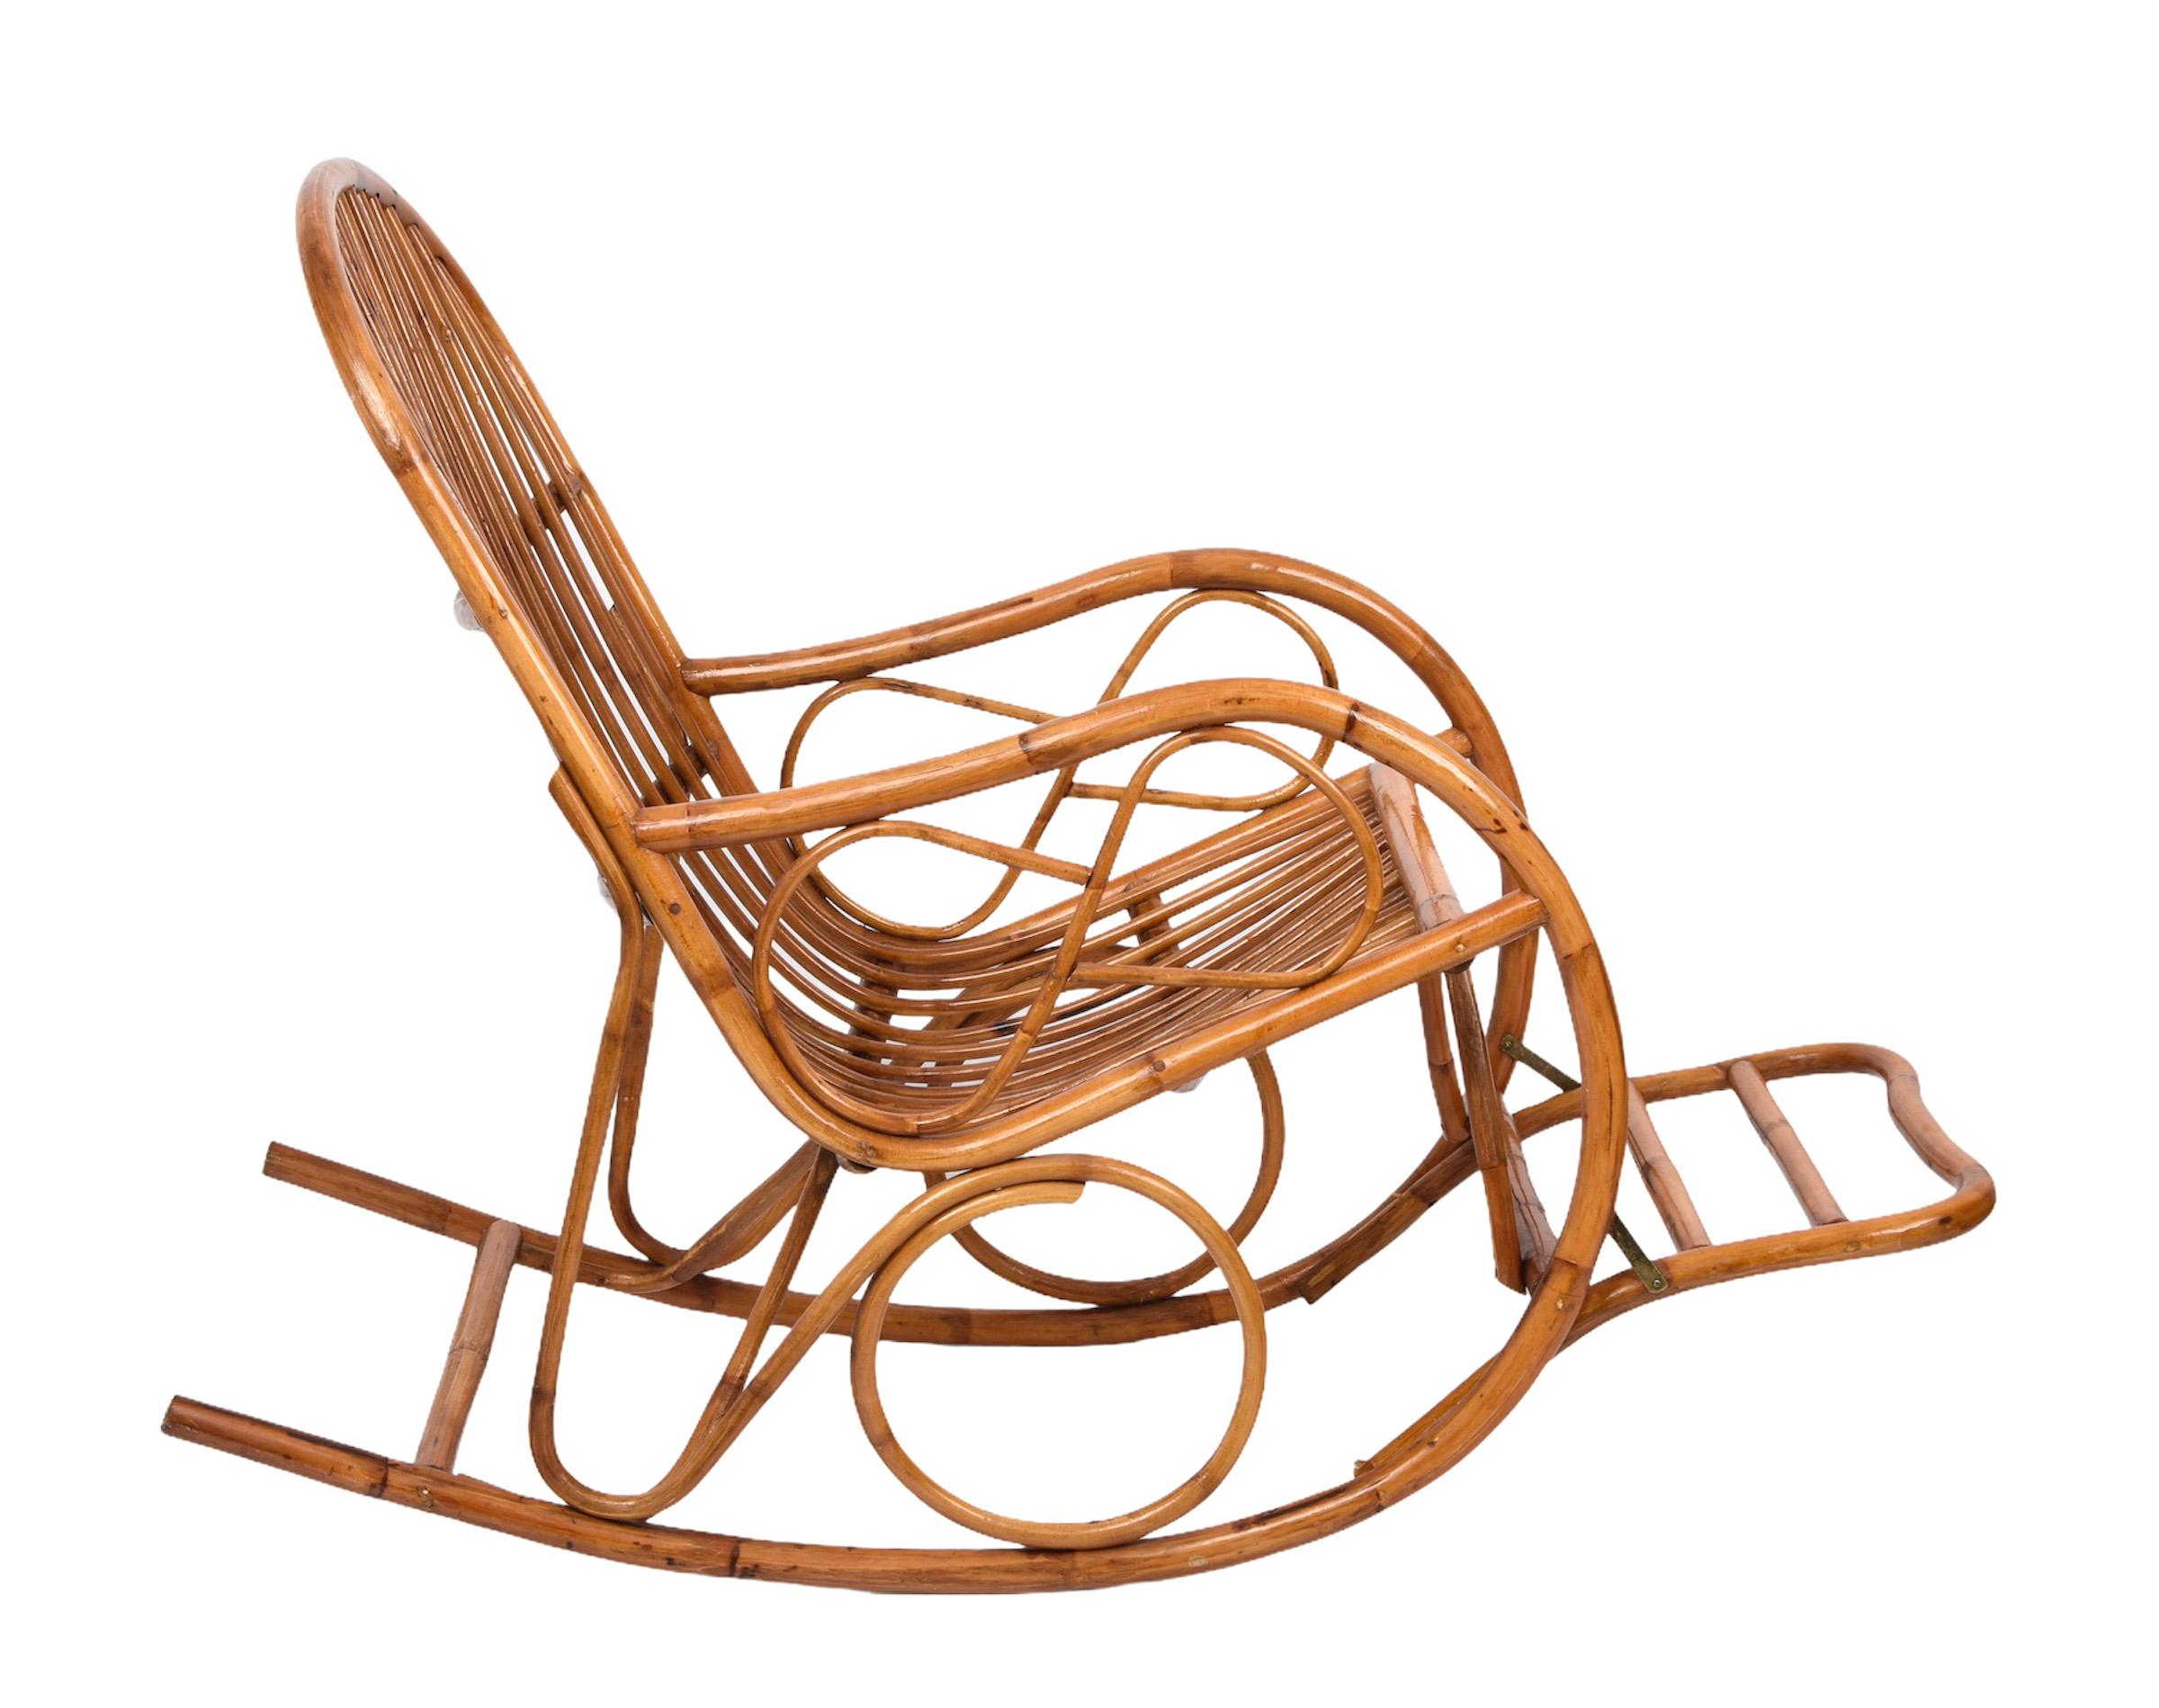 Elegant midcentury French Riviera rocking chair with rattan and bamboo footstool. This fantastic piece was designed and manufactured in Italy in the 1970s.

This chair is unique because it has perfect proportions and is very comfortable with a